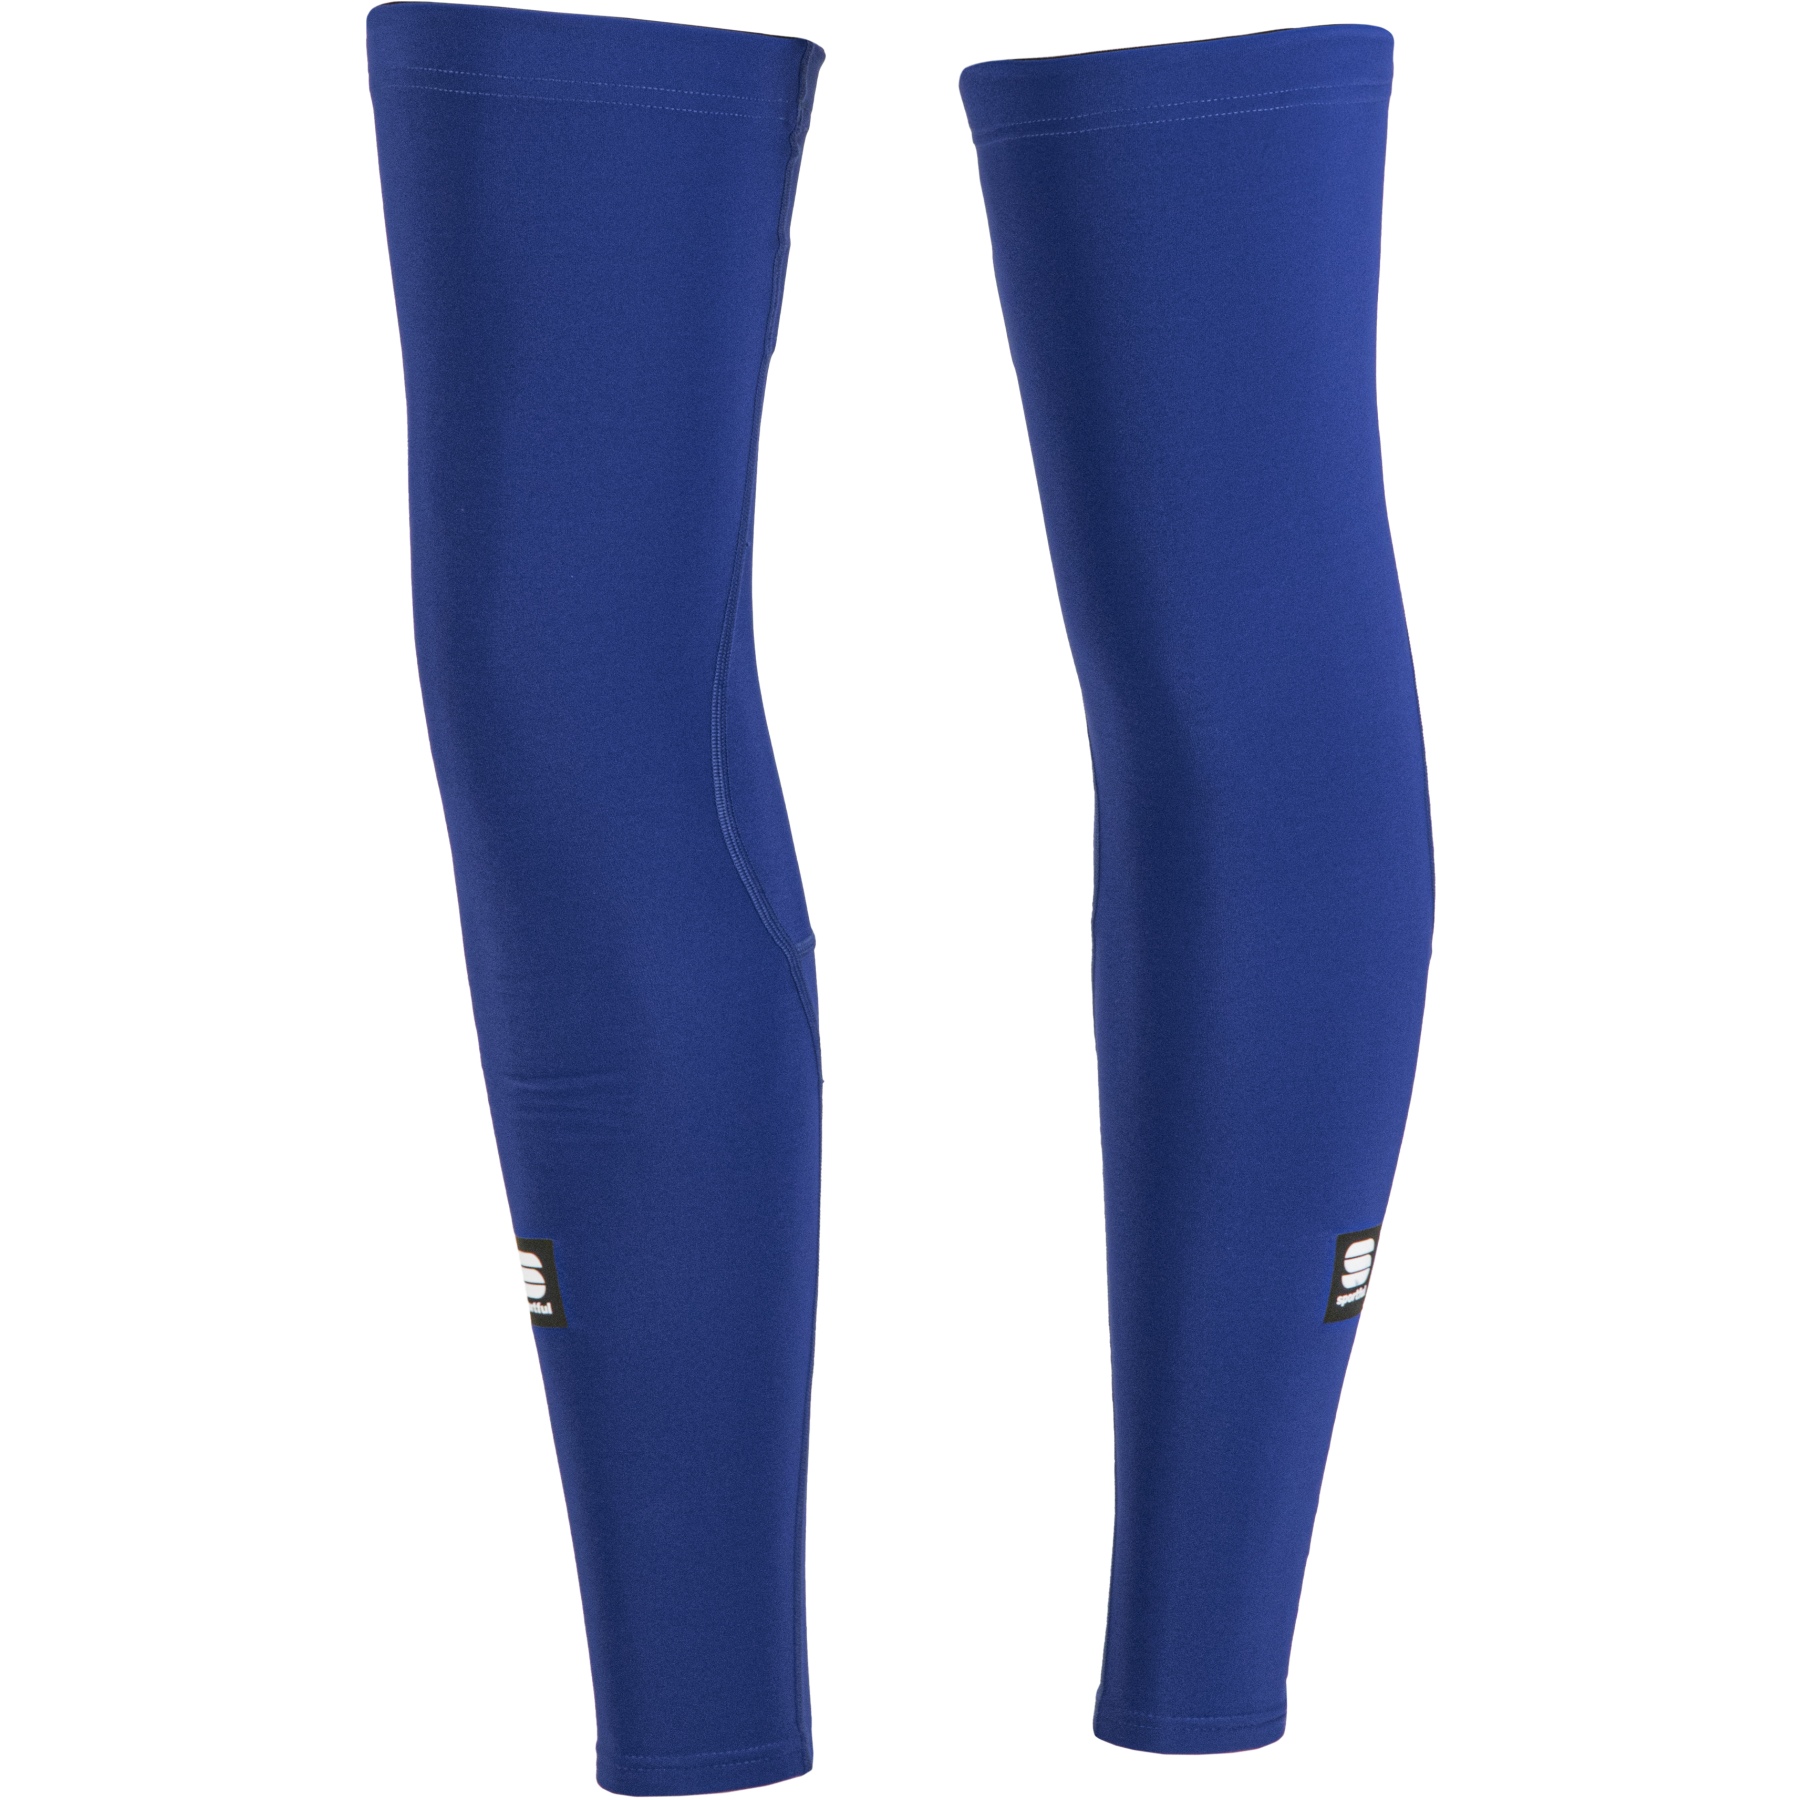 Picture of Sportful TotalEnergies Pro Team Leg Warmers - 469 Energy Blue